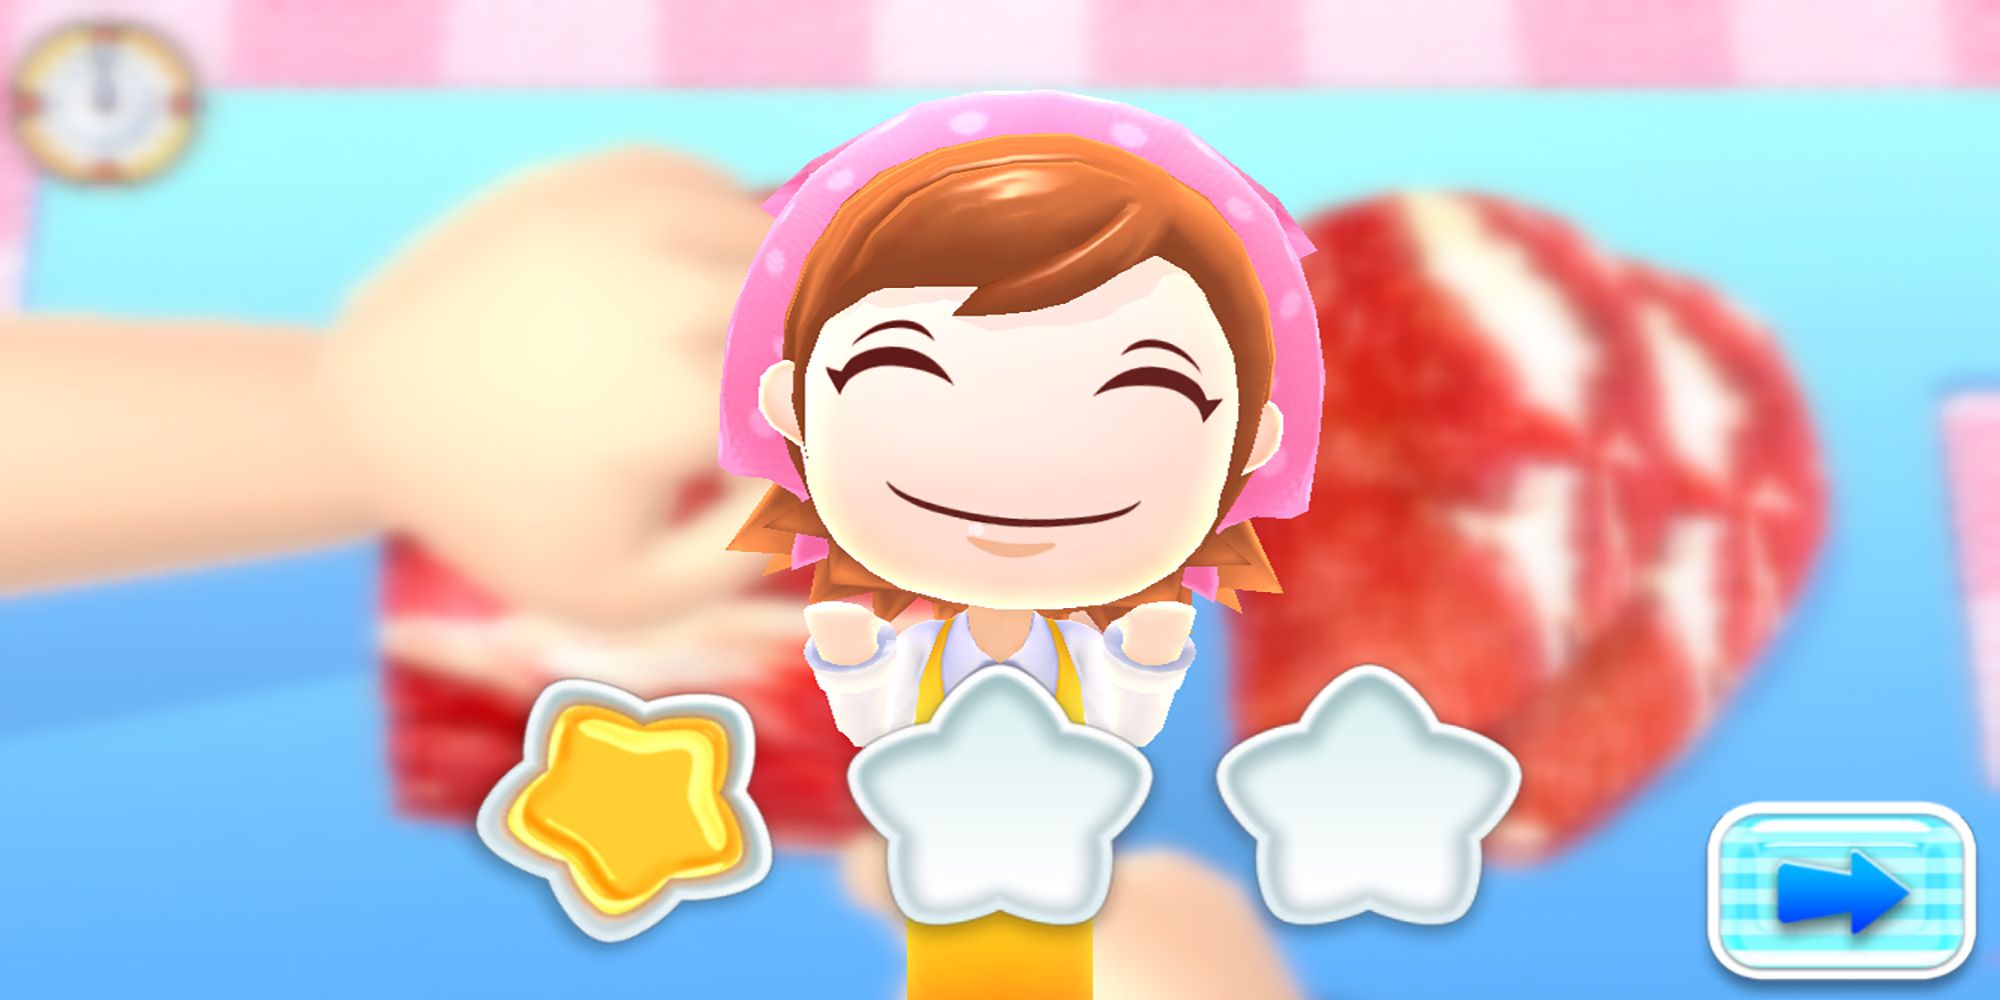 Cooking Mama assures you that you will improve with more practice after failing to slice beef in Cooking Mama: Cuisine!